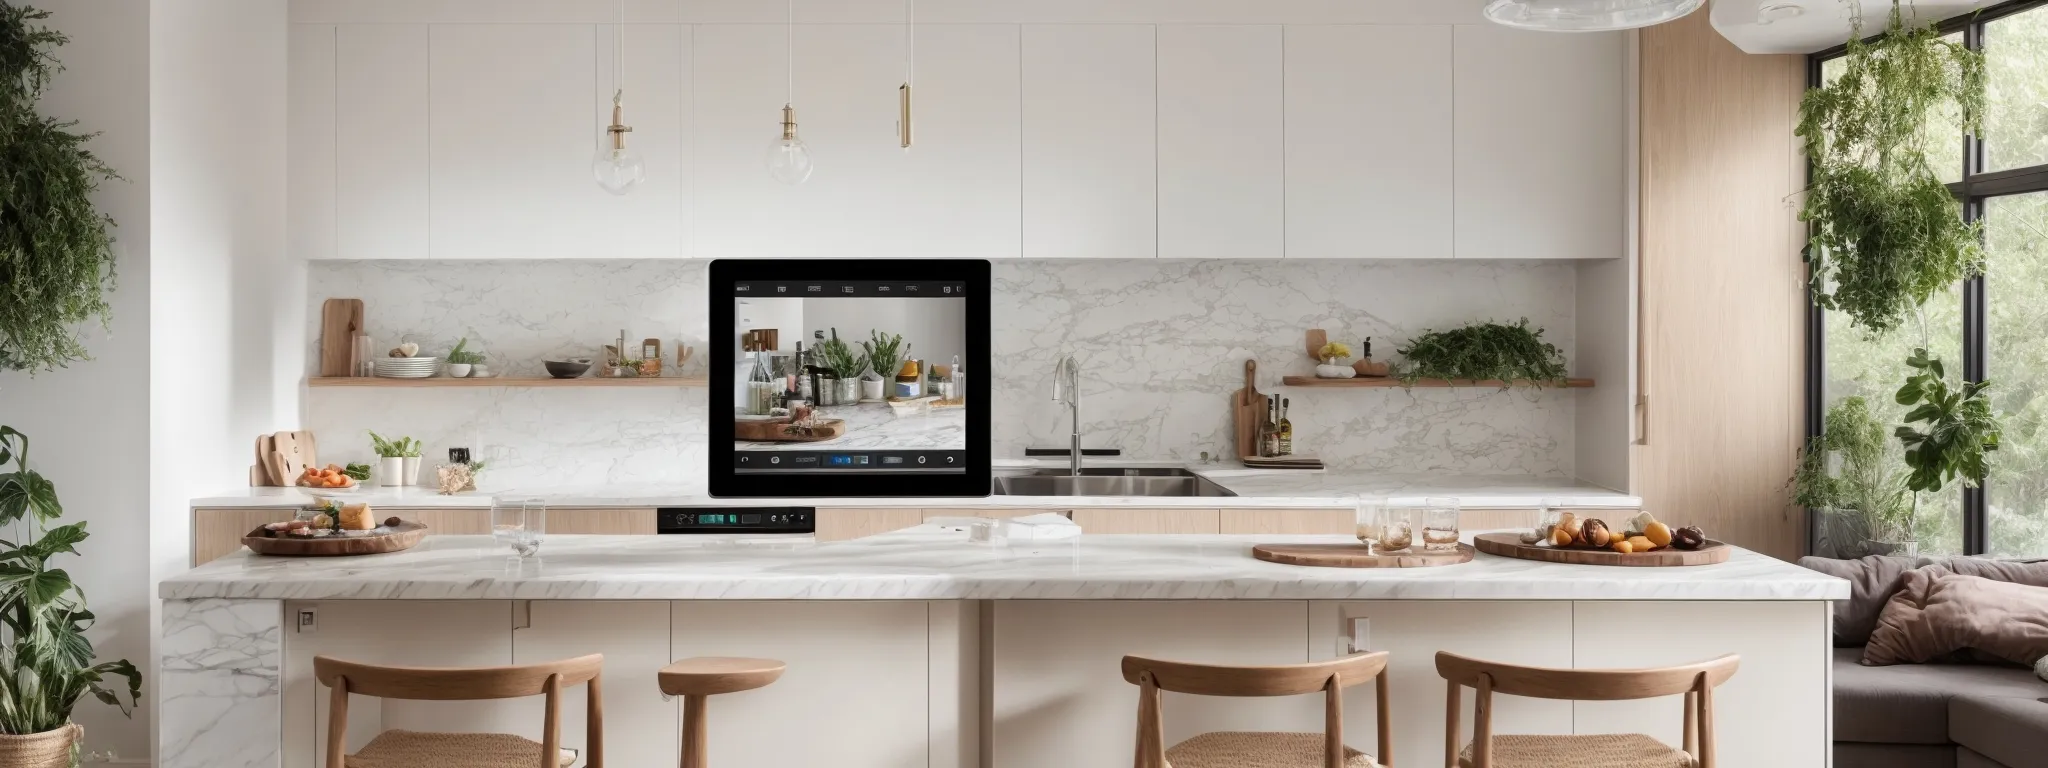 a sleek, modern kitchen transformation before and after, with a tablet displaying the interactive design simulator on the marble countertop.